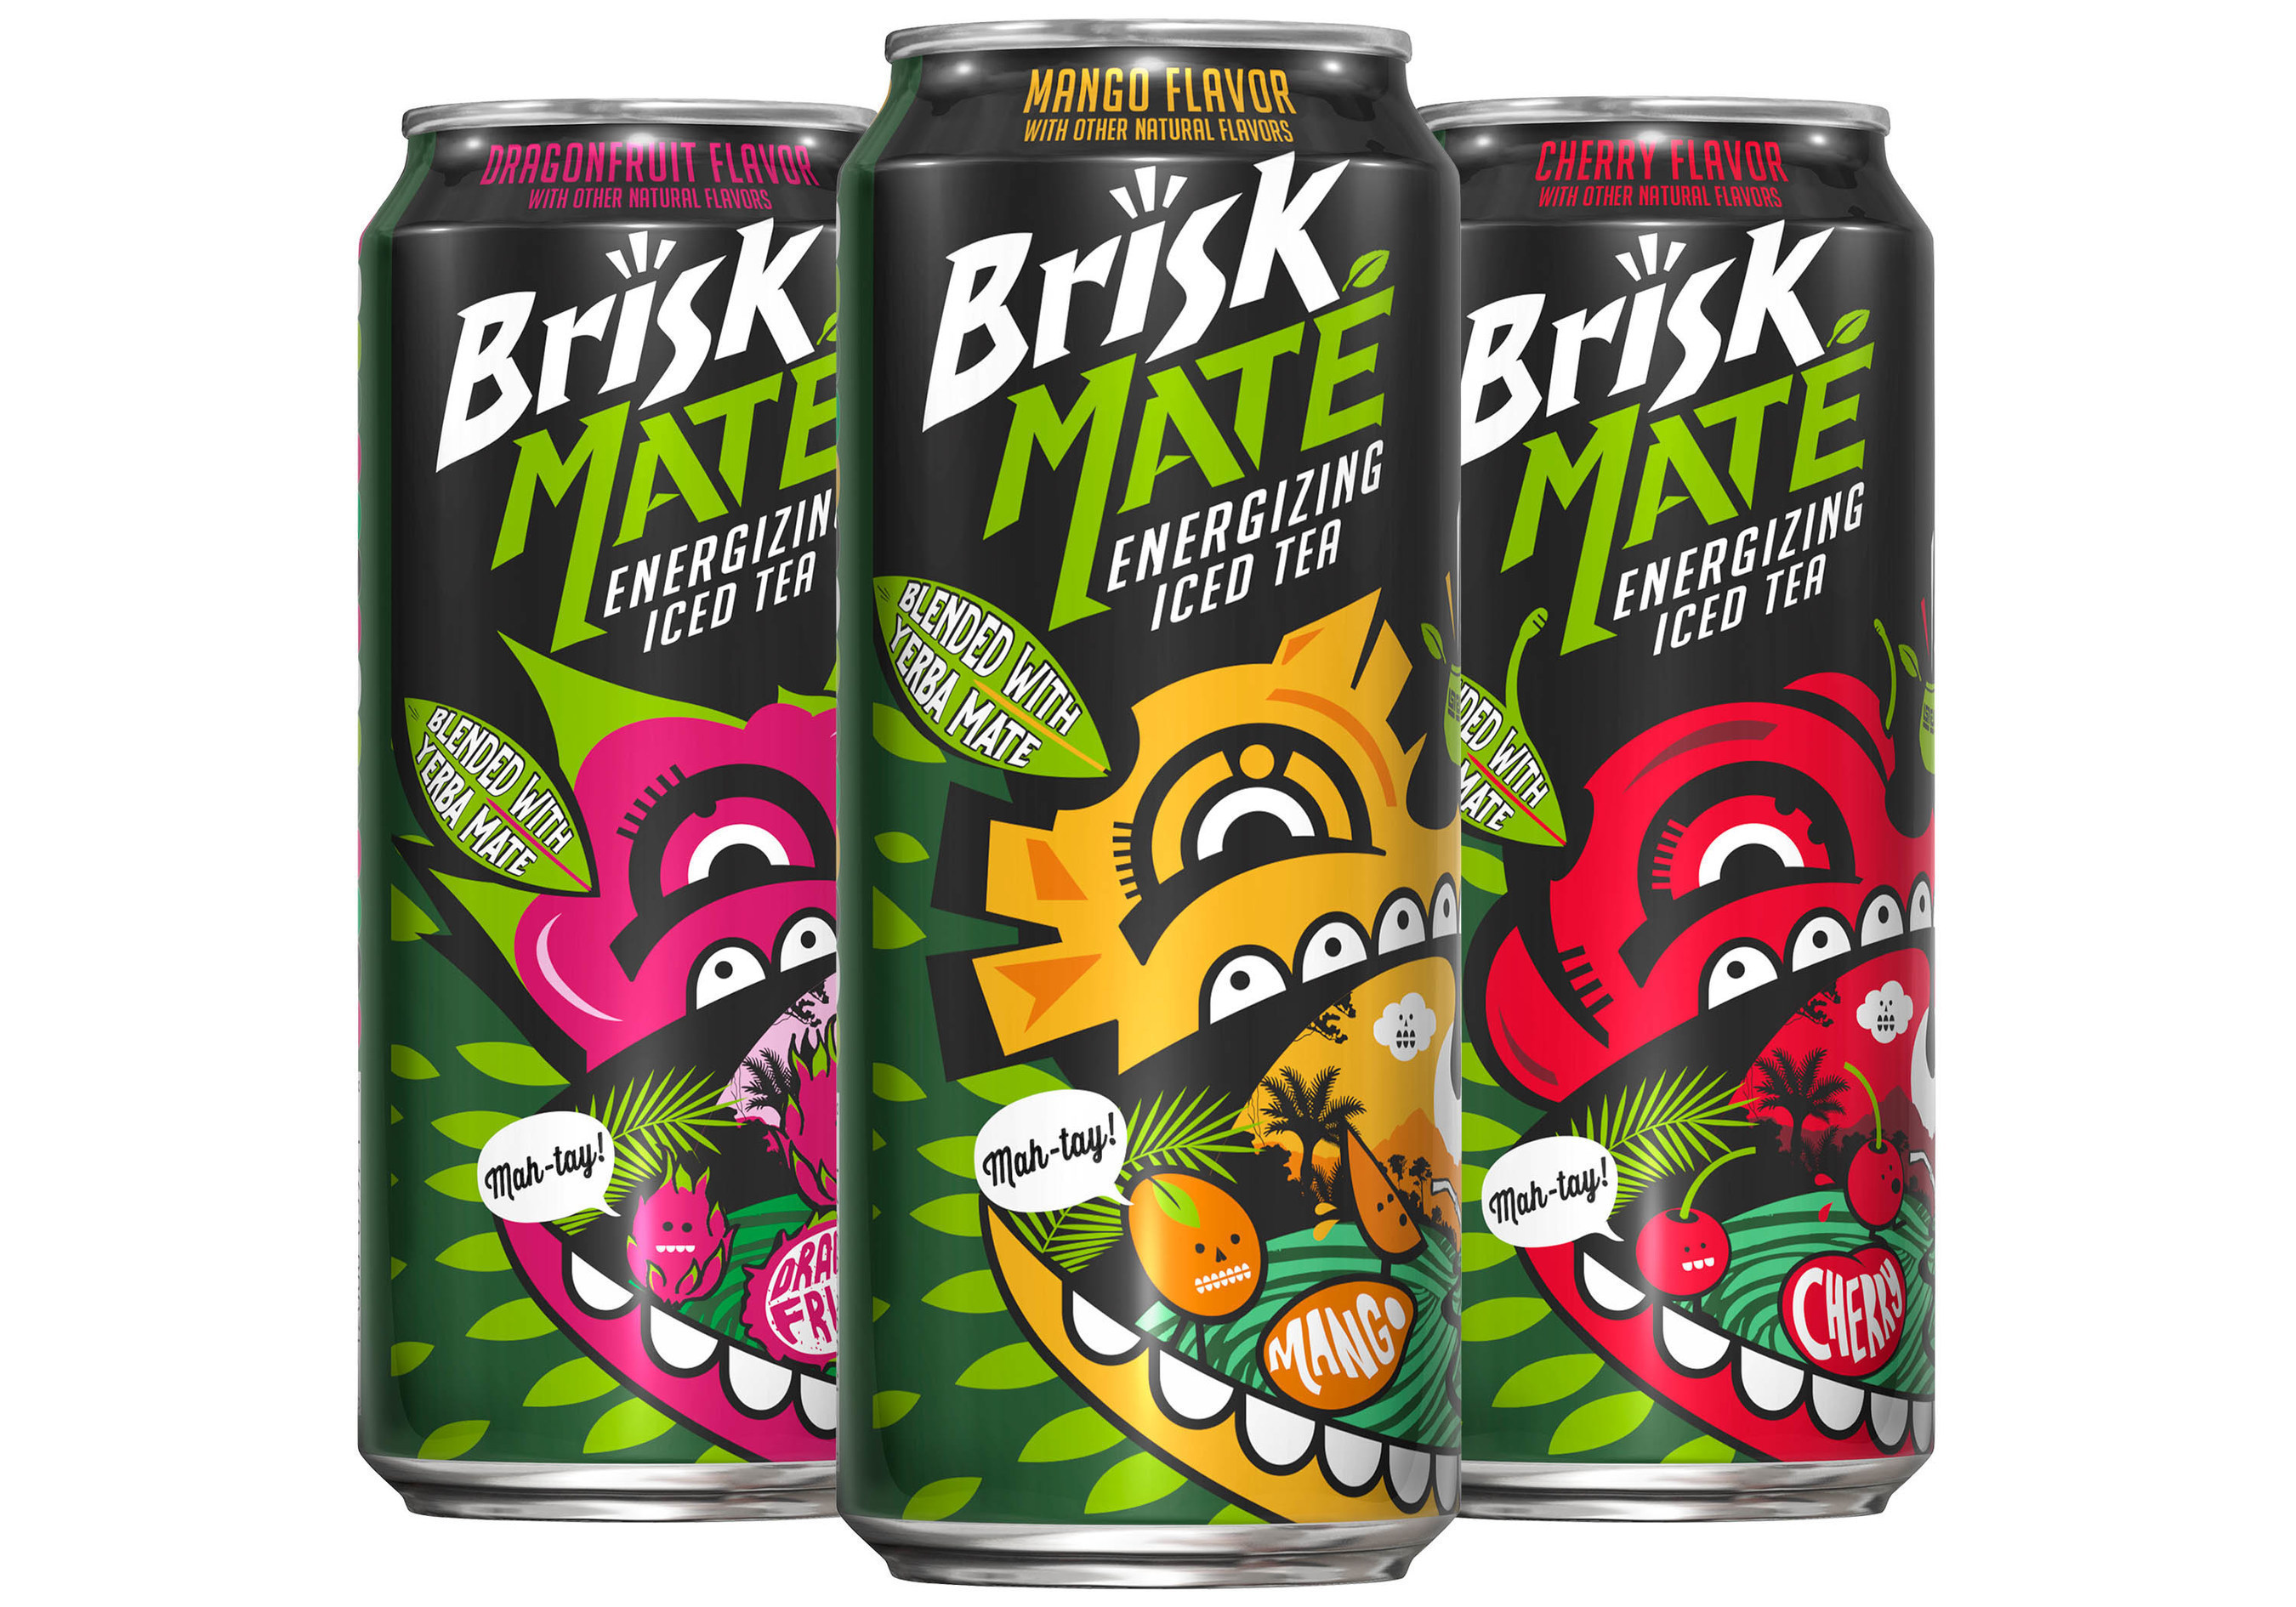 Brisk(R) Iced Tea Introduces Brisk Mate -- Iced Tea Blended with South American Yerba Mate